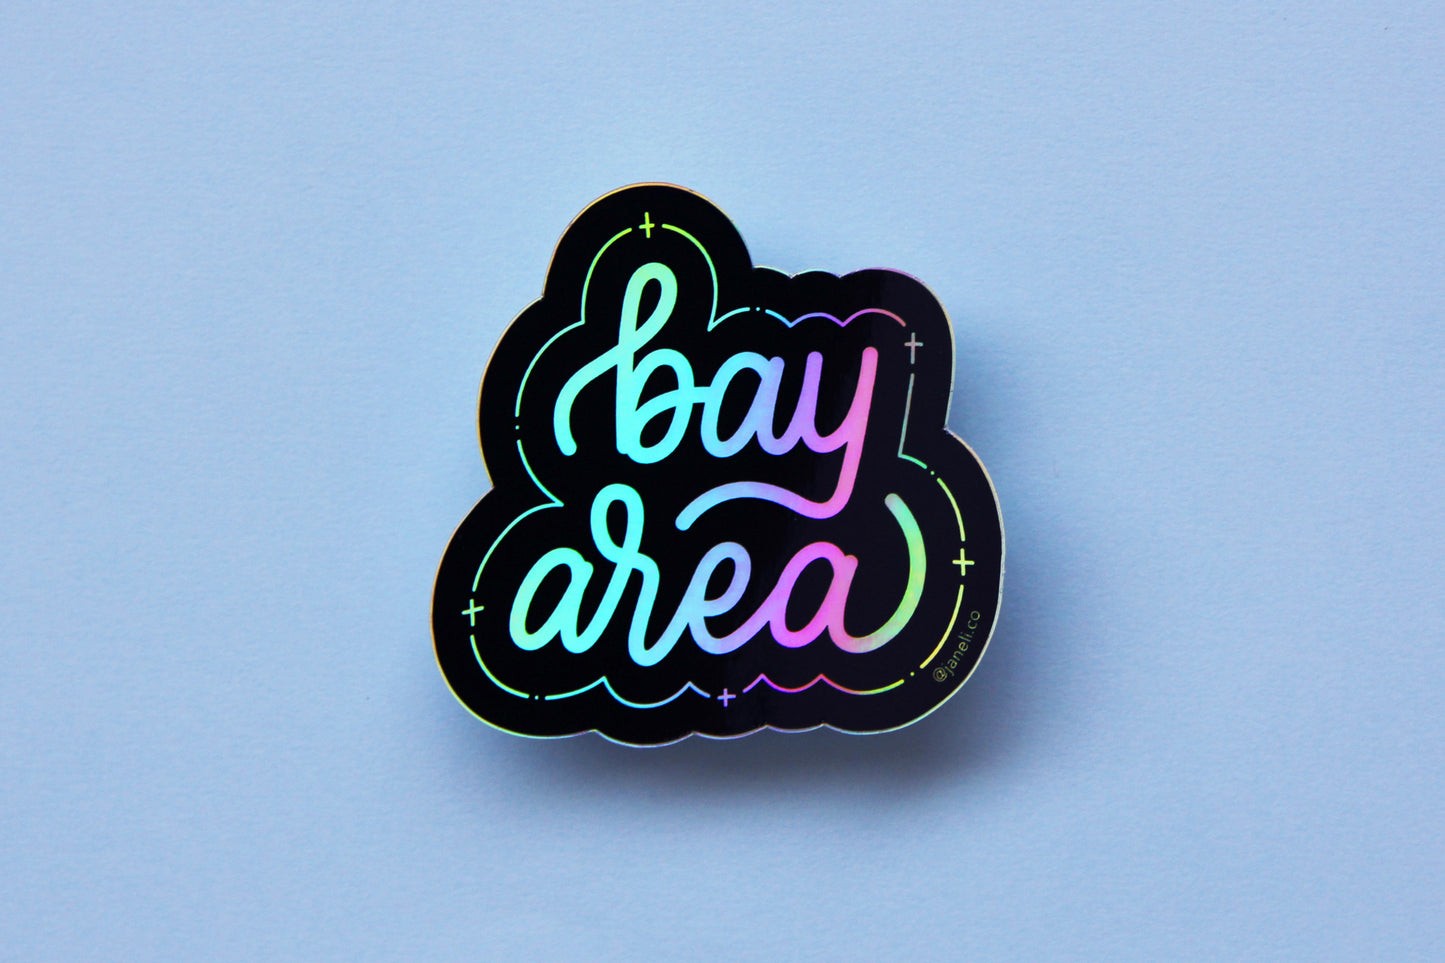 A holographic JaneLi.Co sticker that says "Bay Area" in cursive lettering over a sky blue background. 